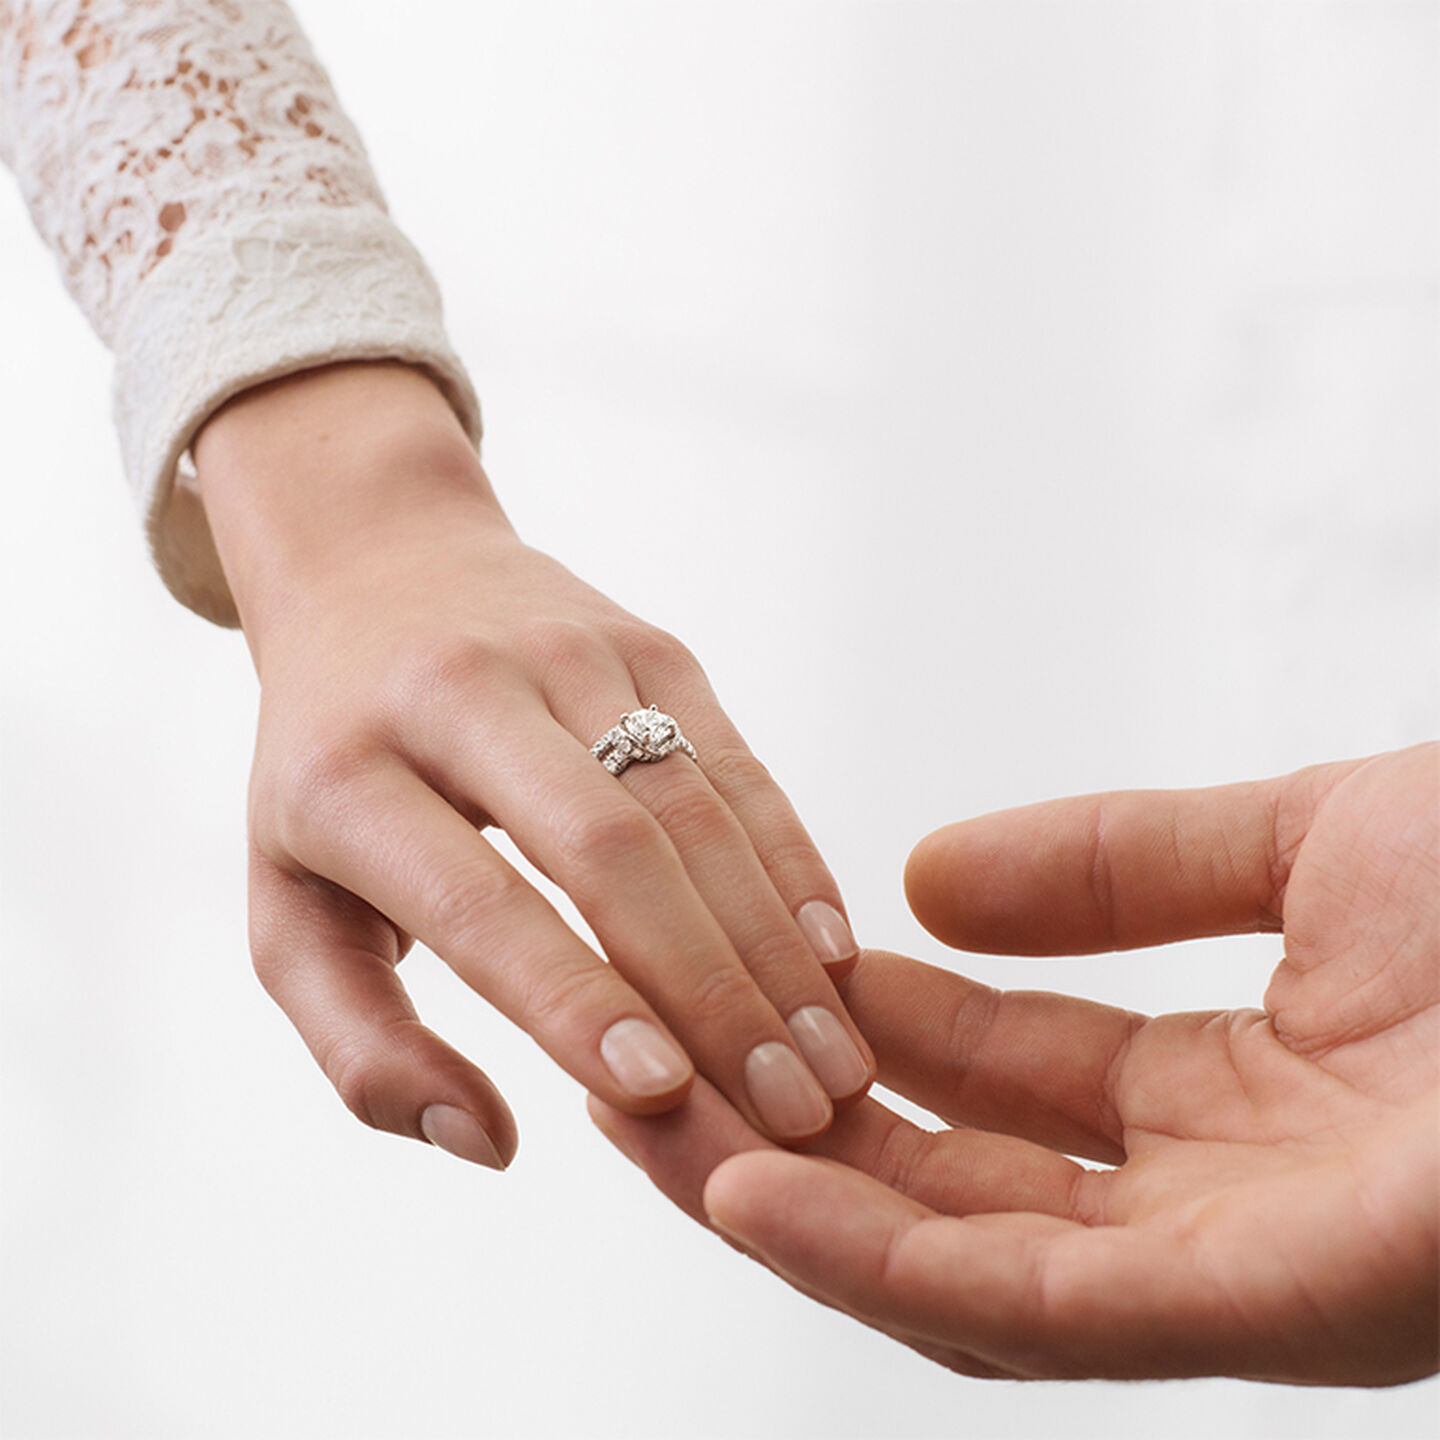 Picture of hands, one wearing a Chaumet engagement ring on a white background